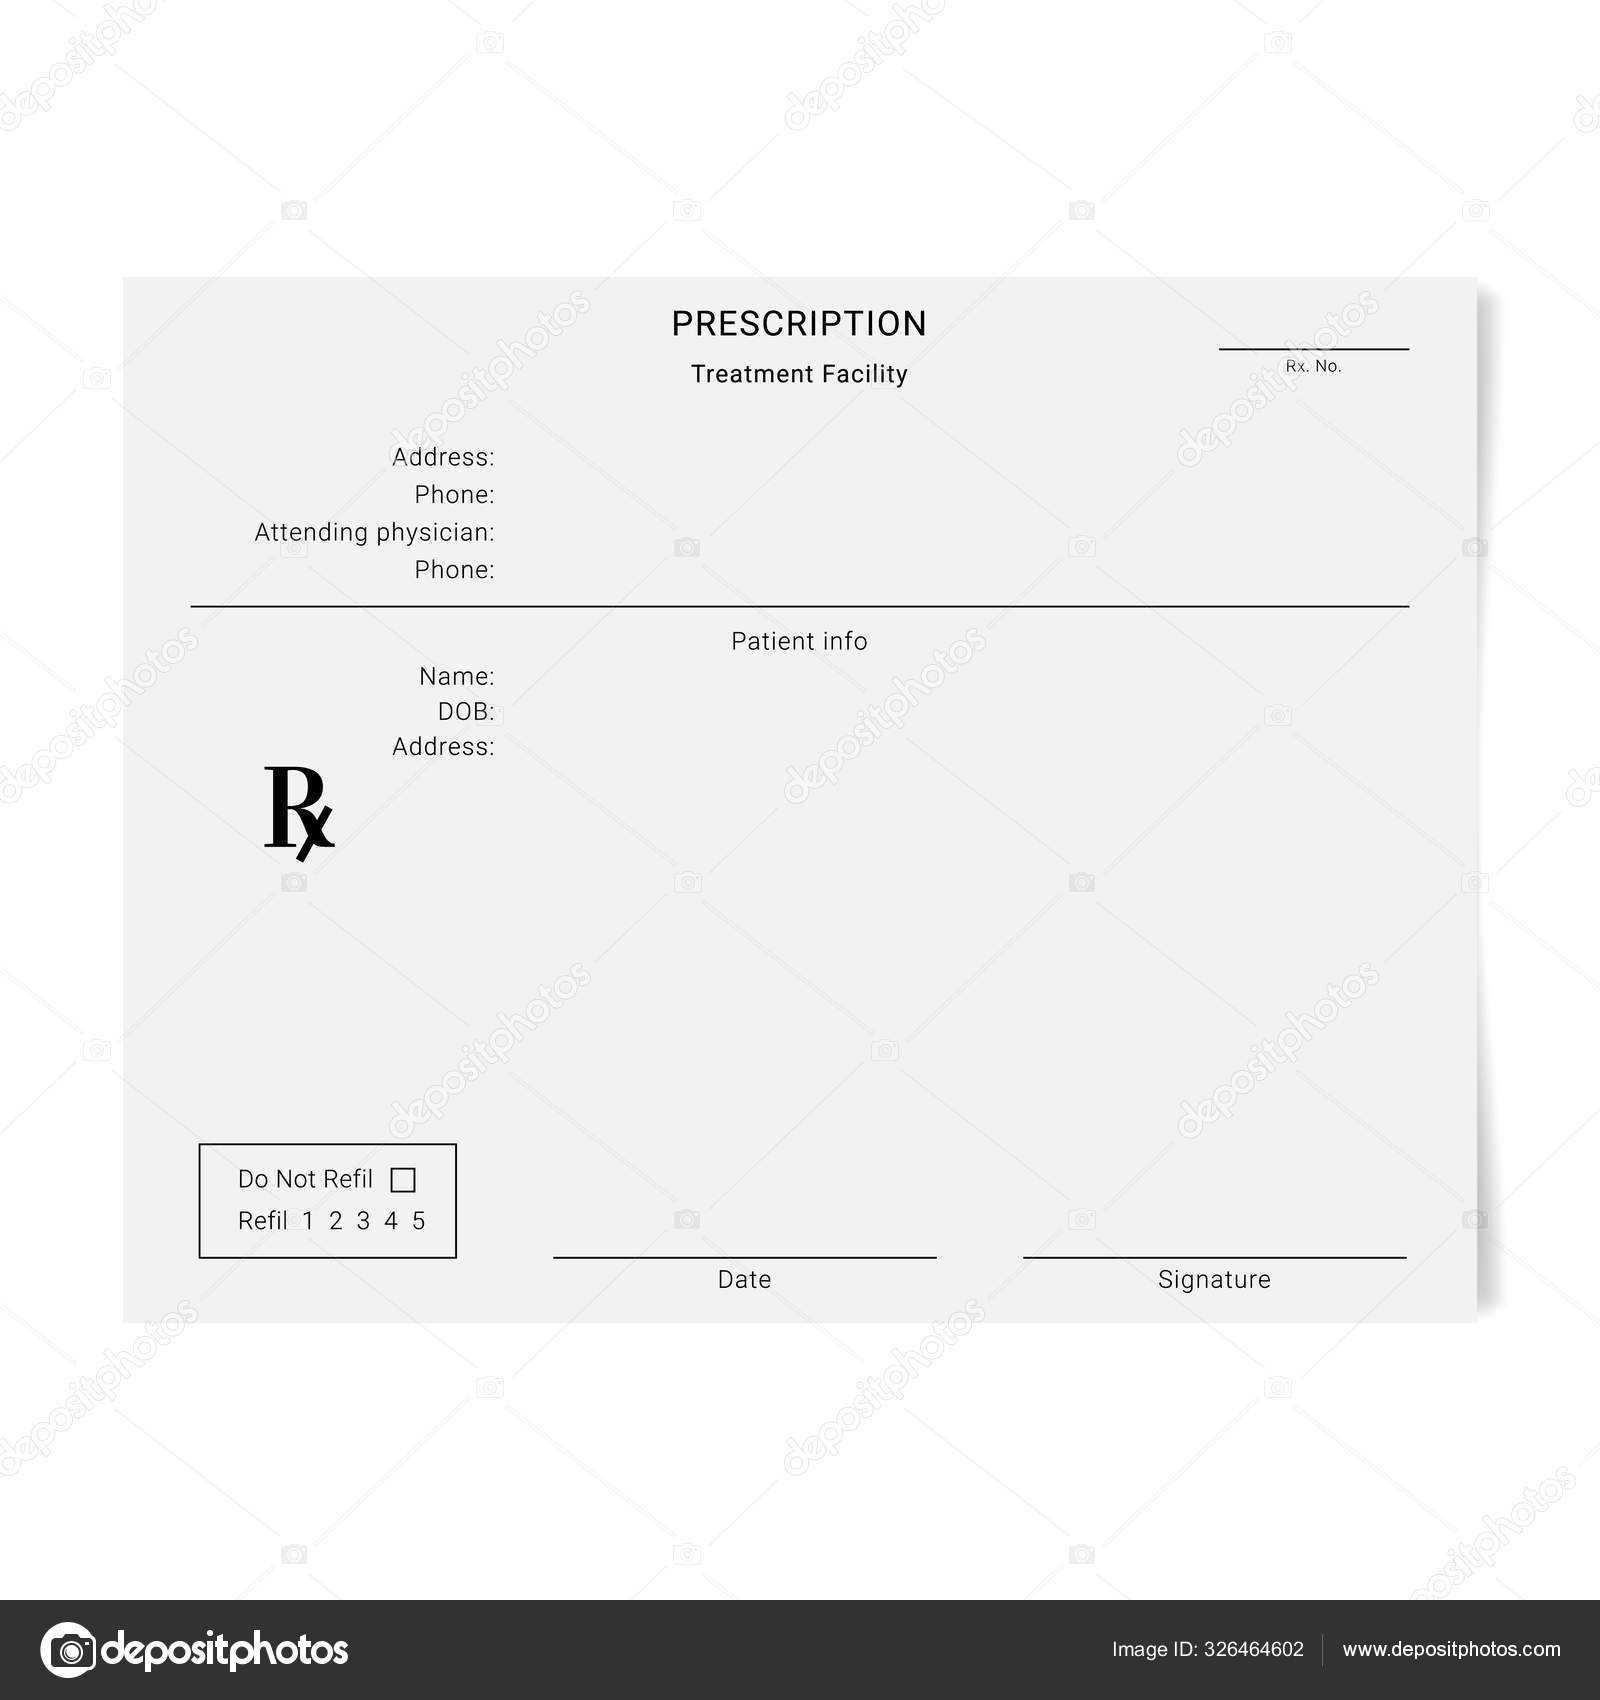 Blank Rx Form For Medical Treatment Prescription And Drugs Intended For Blank Prescription Pad Template